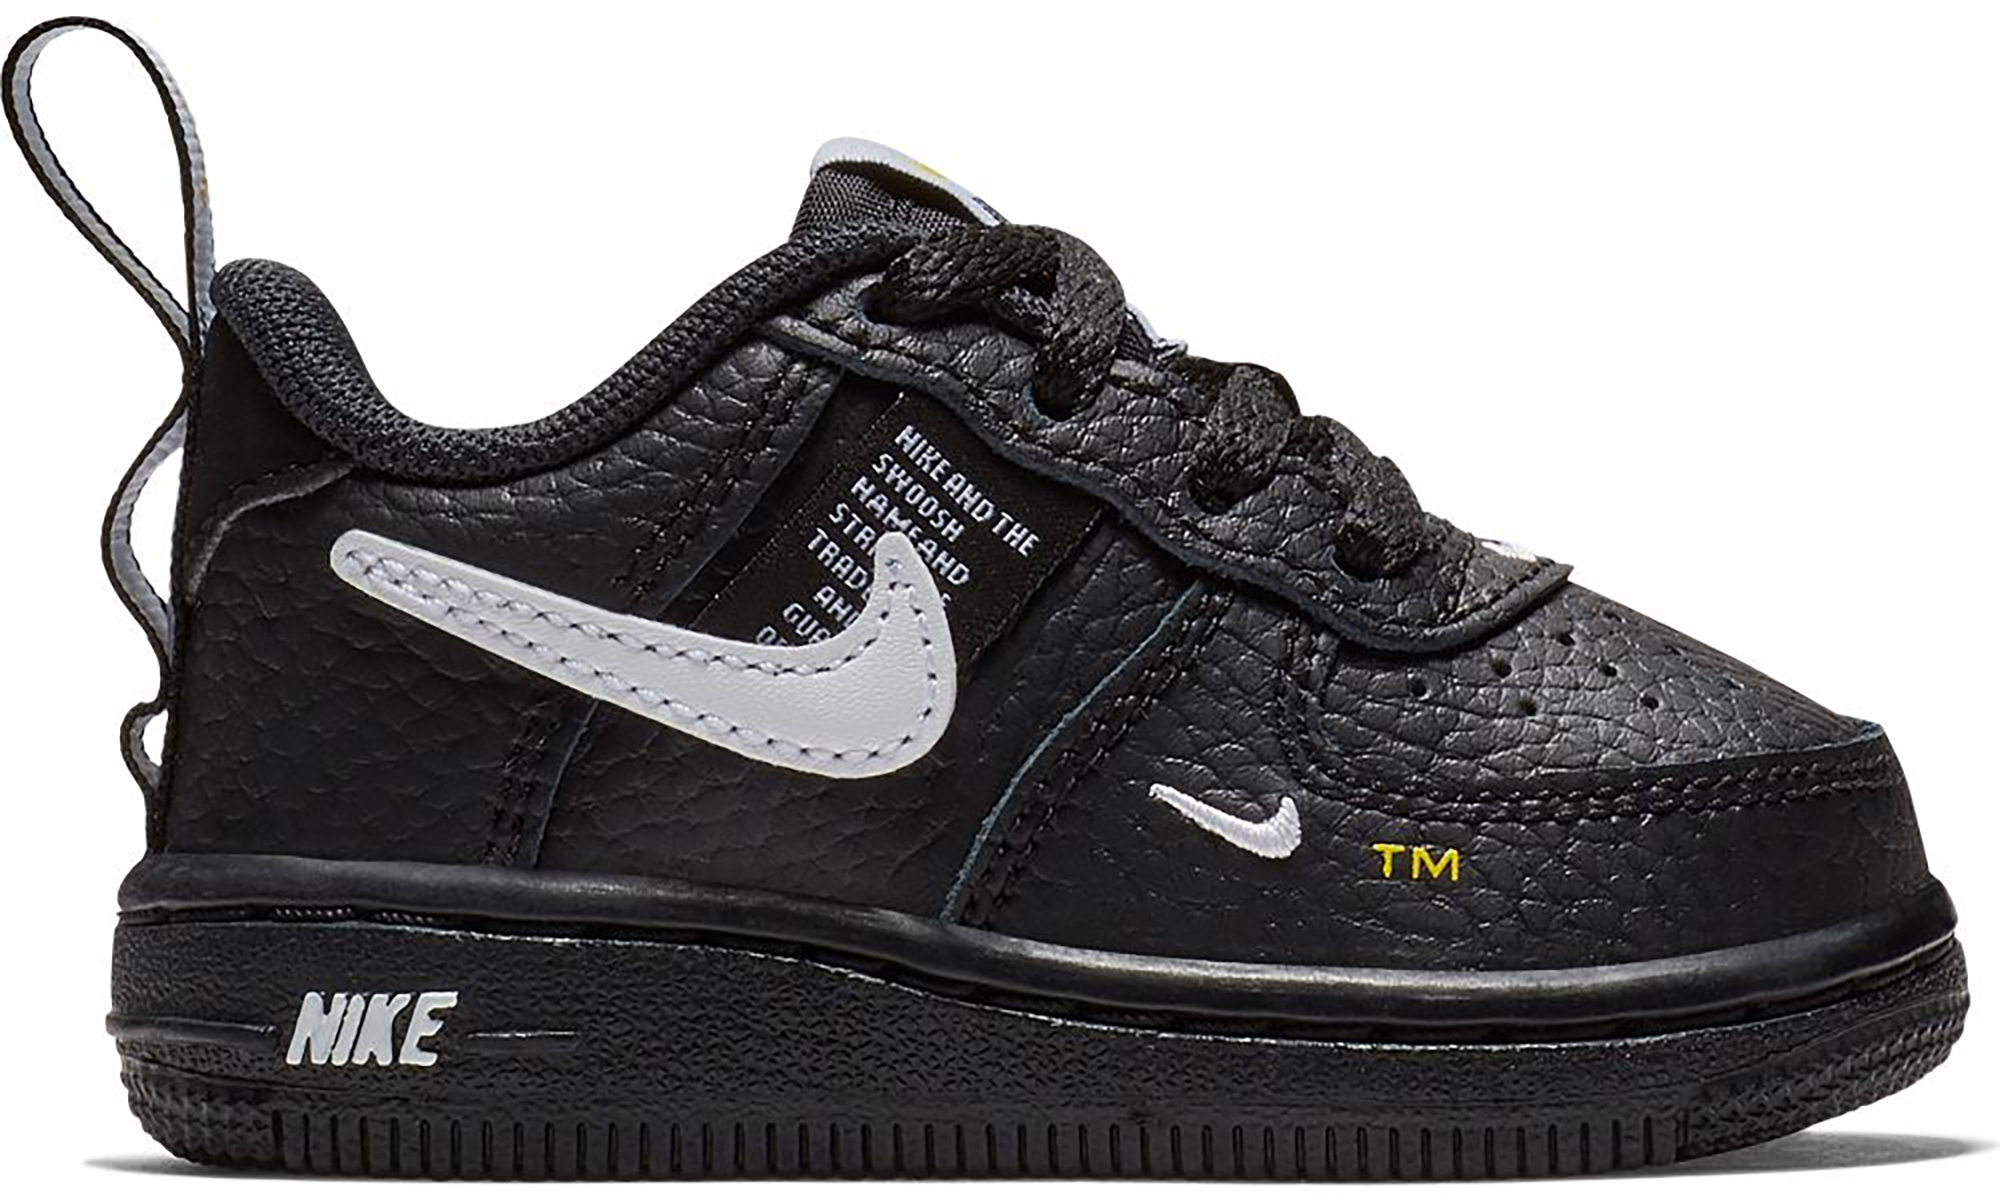 air force 1 utility stockx